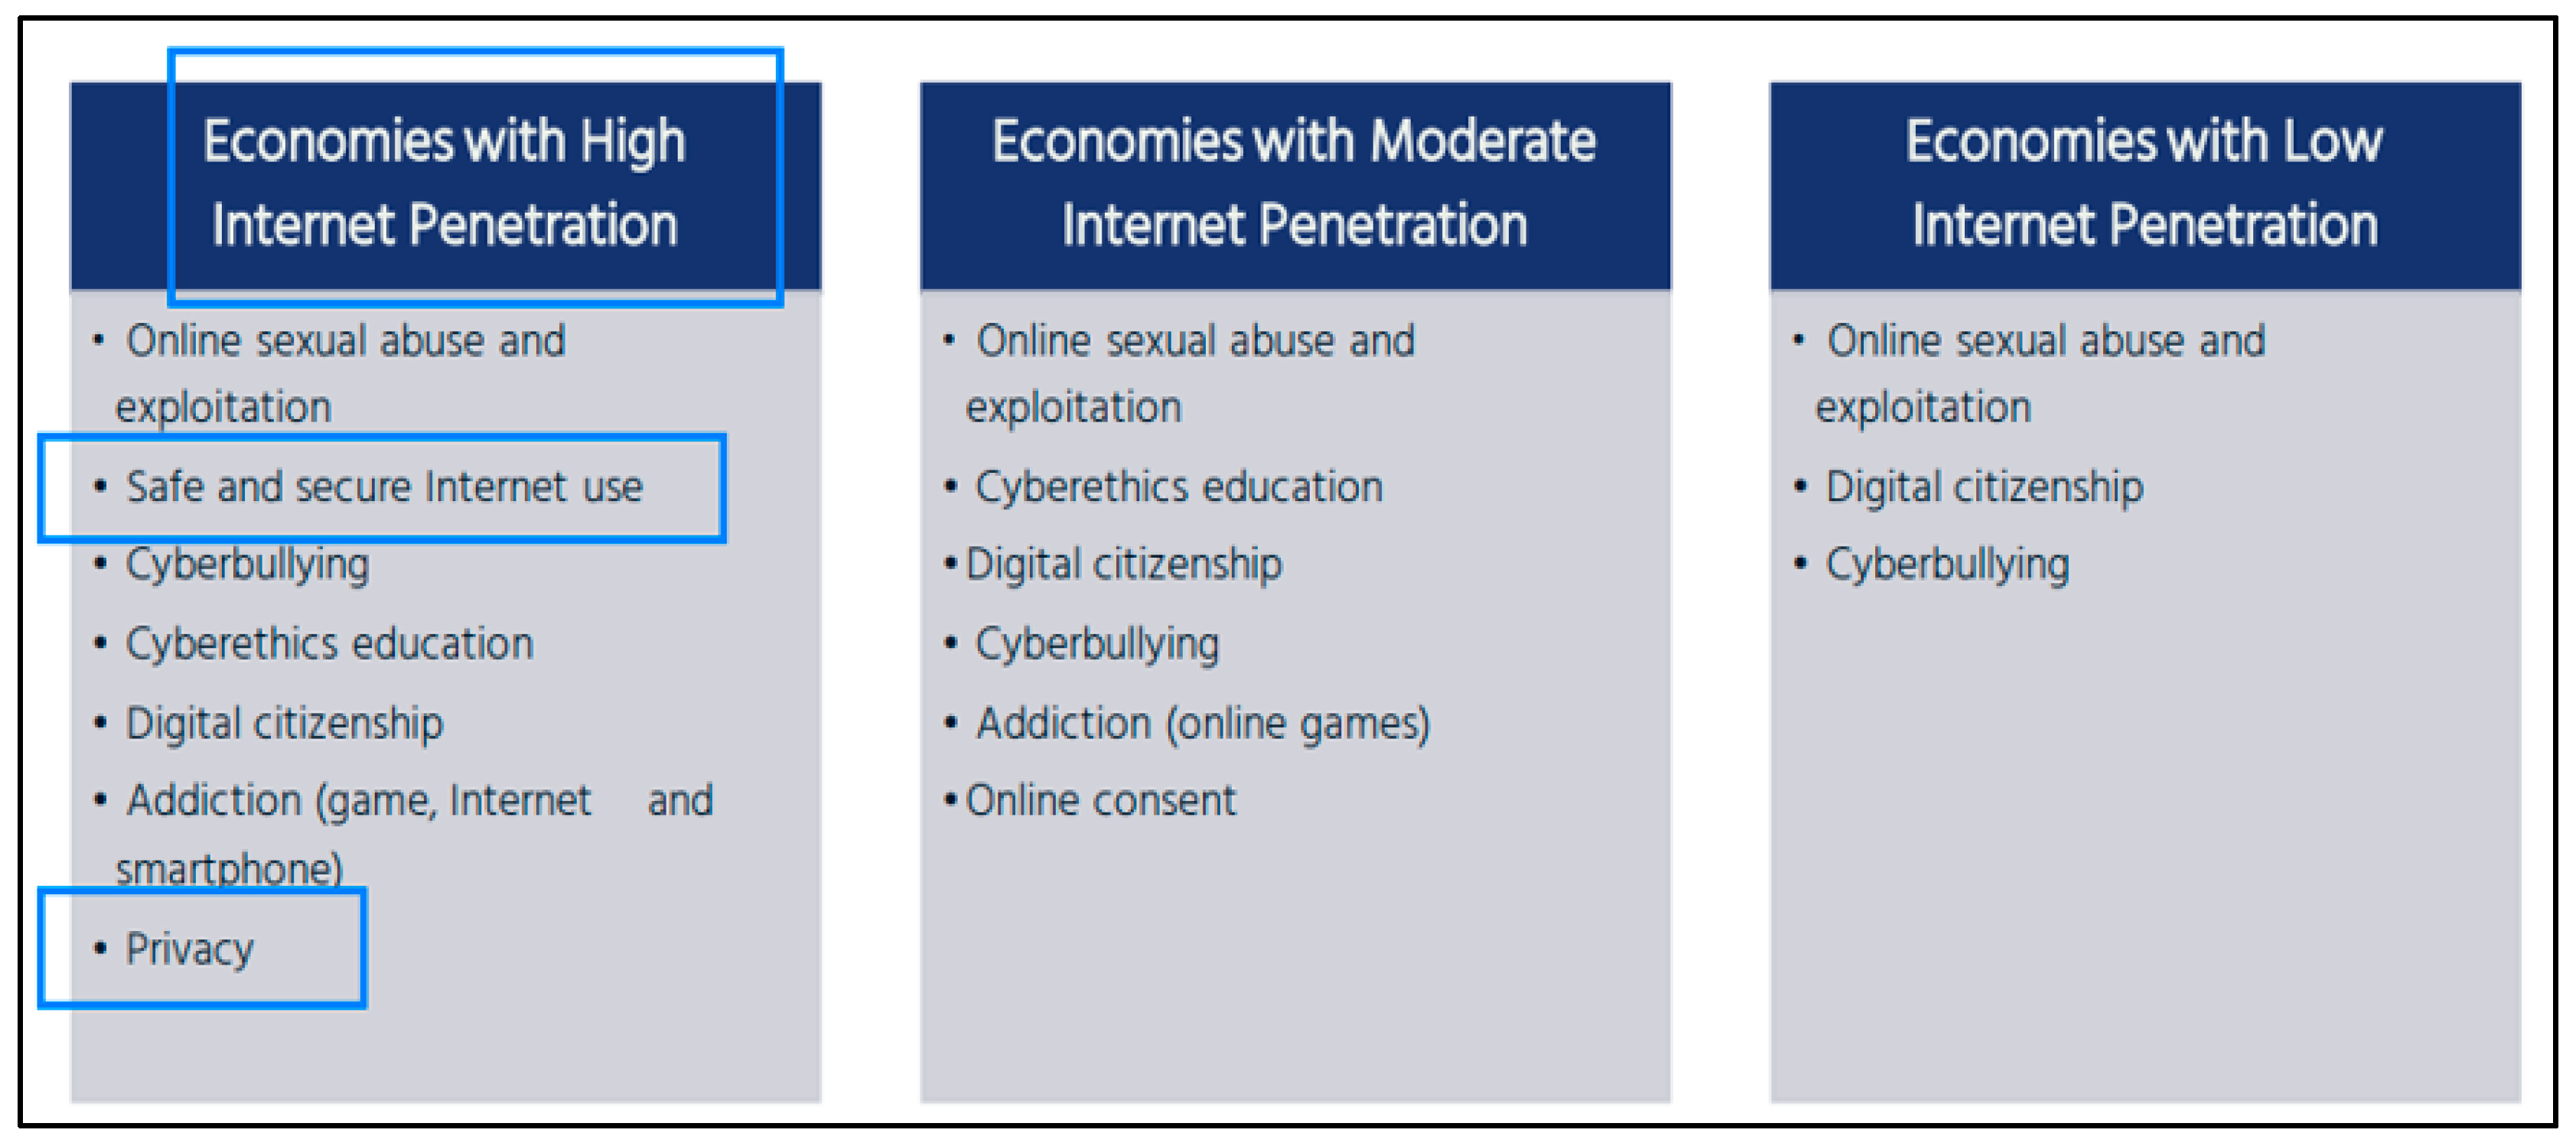 Why online gaming matters to the digital economy